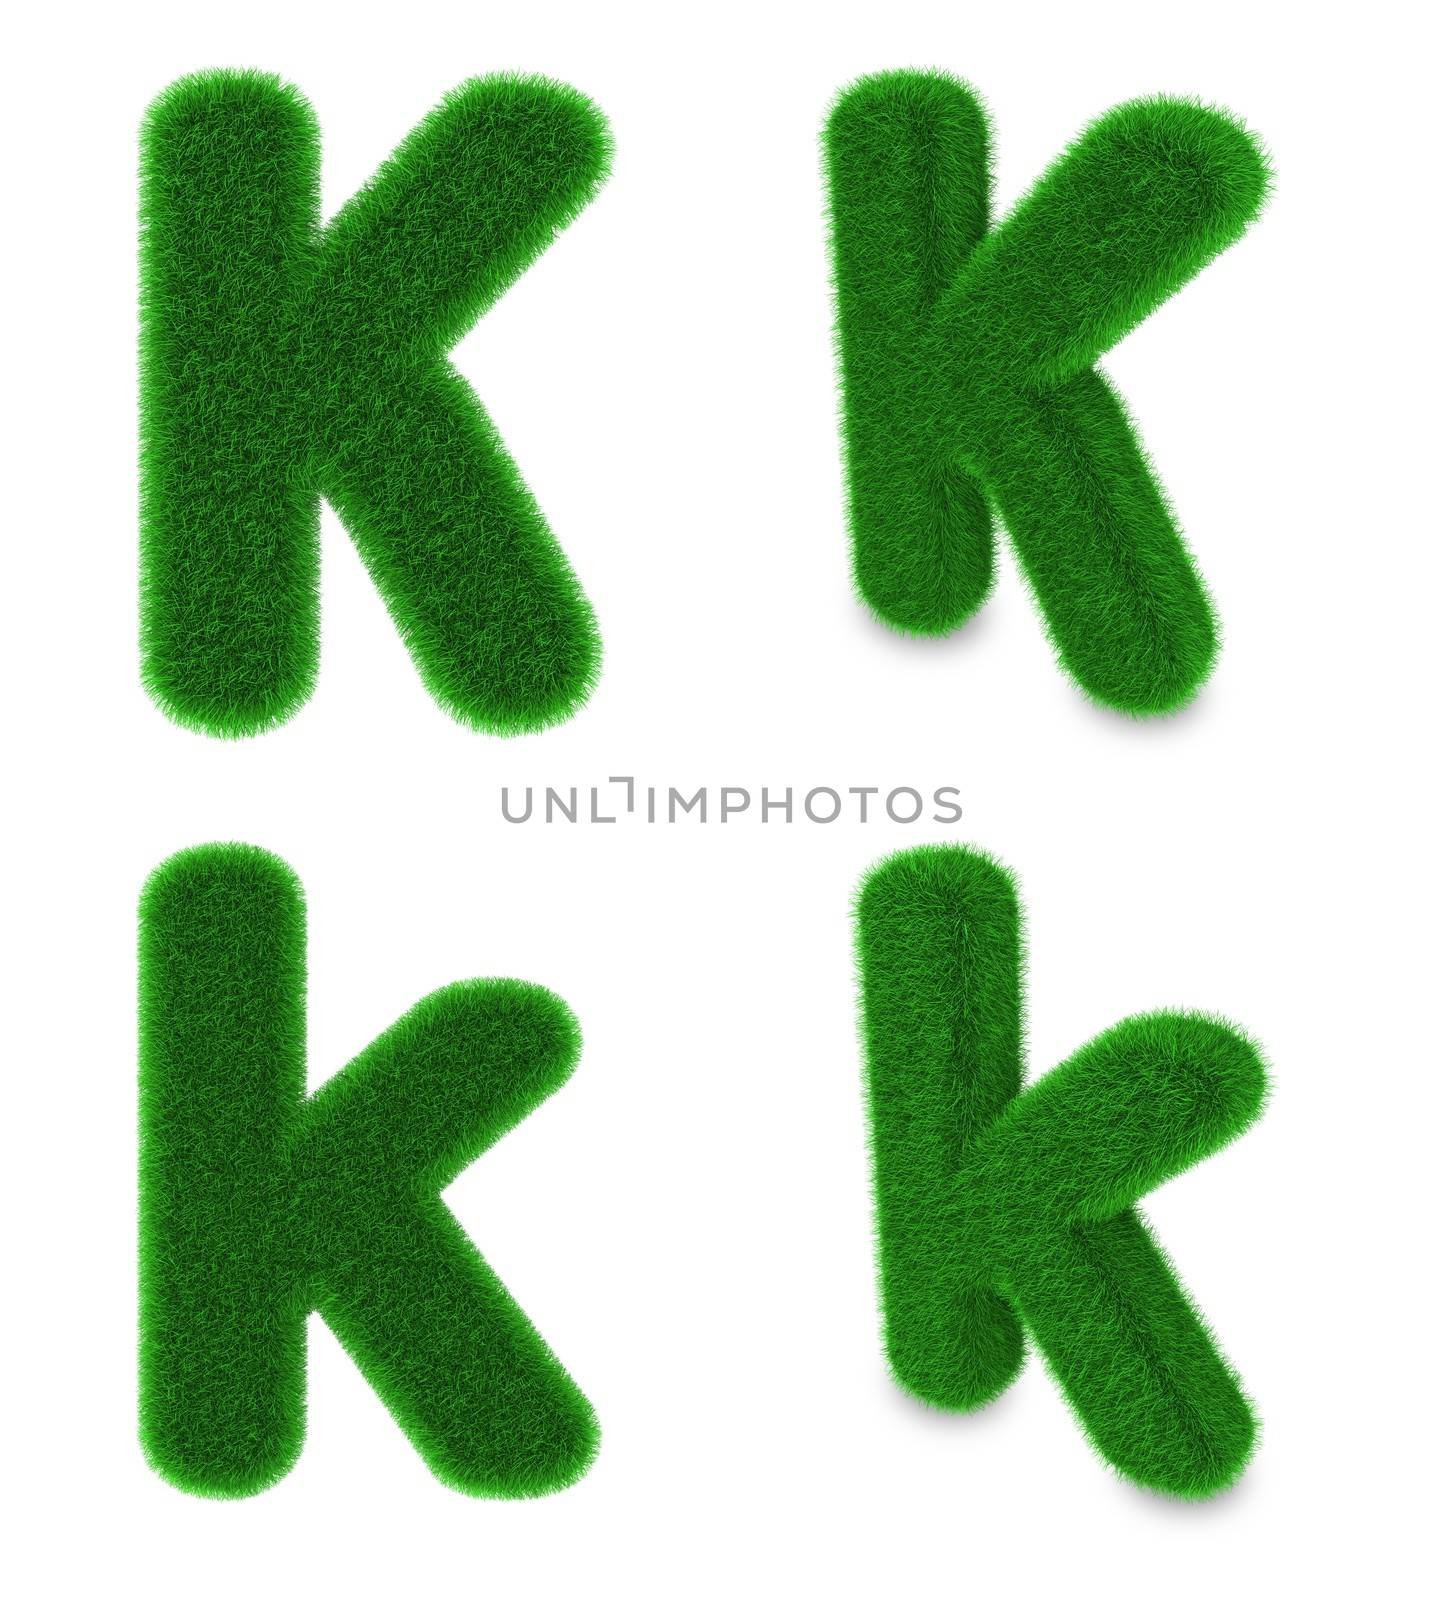 Letter K made of grass by Harvepino